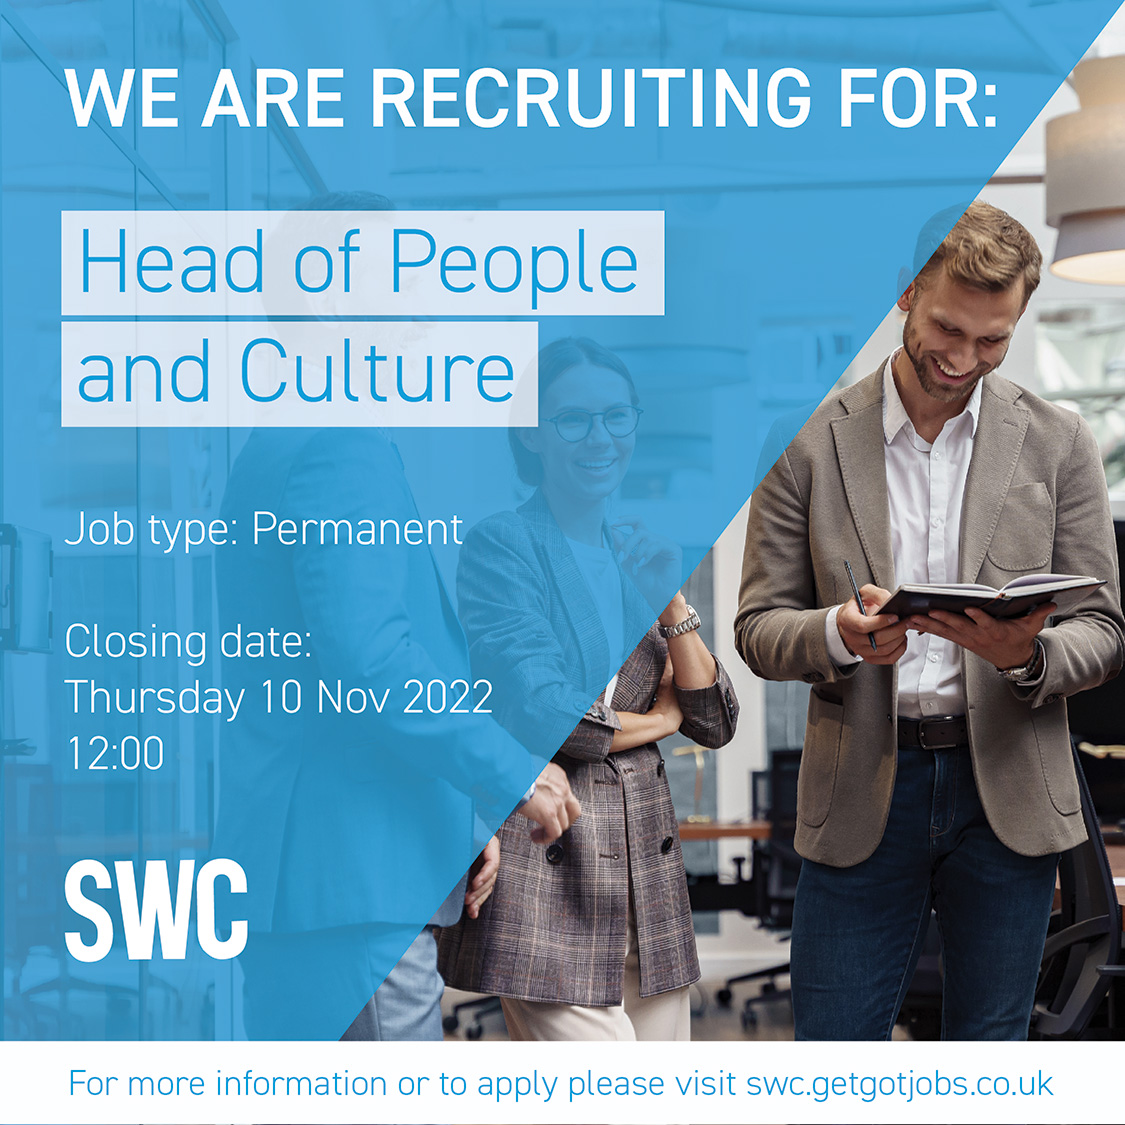 South West College are looking for a Head of People and Culture to shape, lead and deliver a people management service across the college. To find out more or apply for this role, please visit 👉 swc.getgotjobs.co.uk #jobstop #jobfairy #nijobs #recruitni #hiring #jobsearch